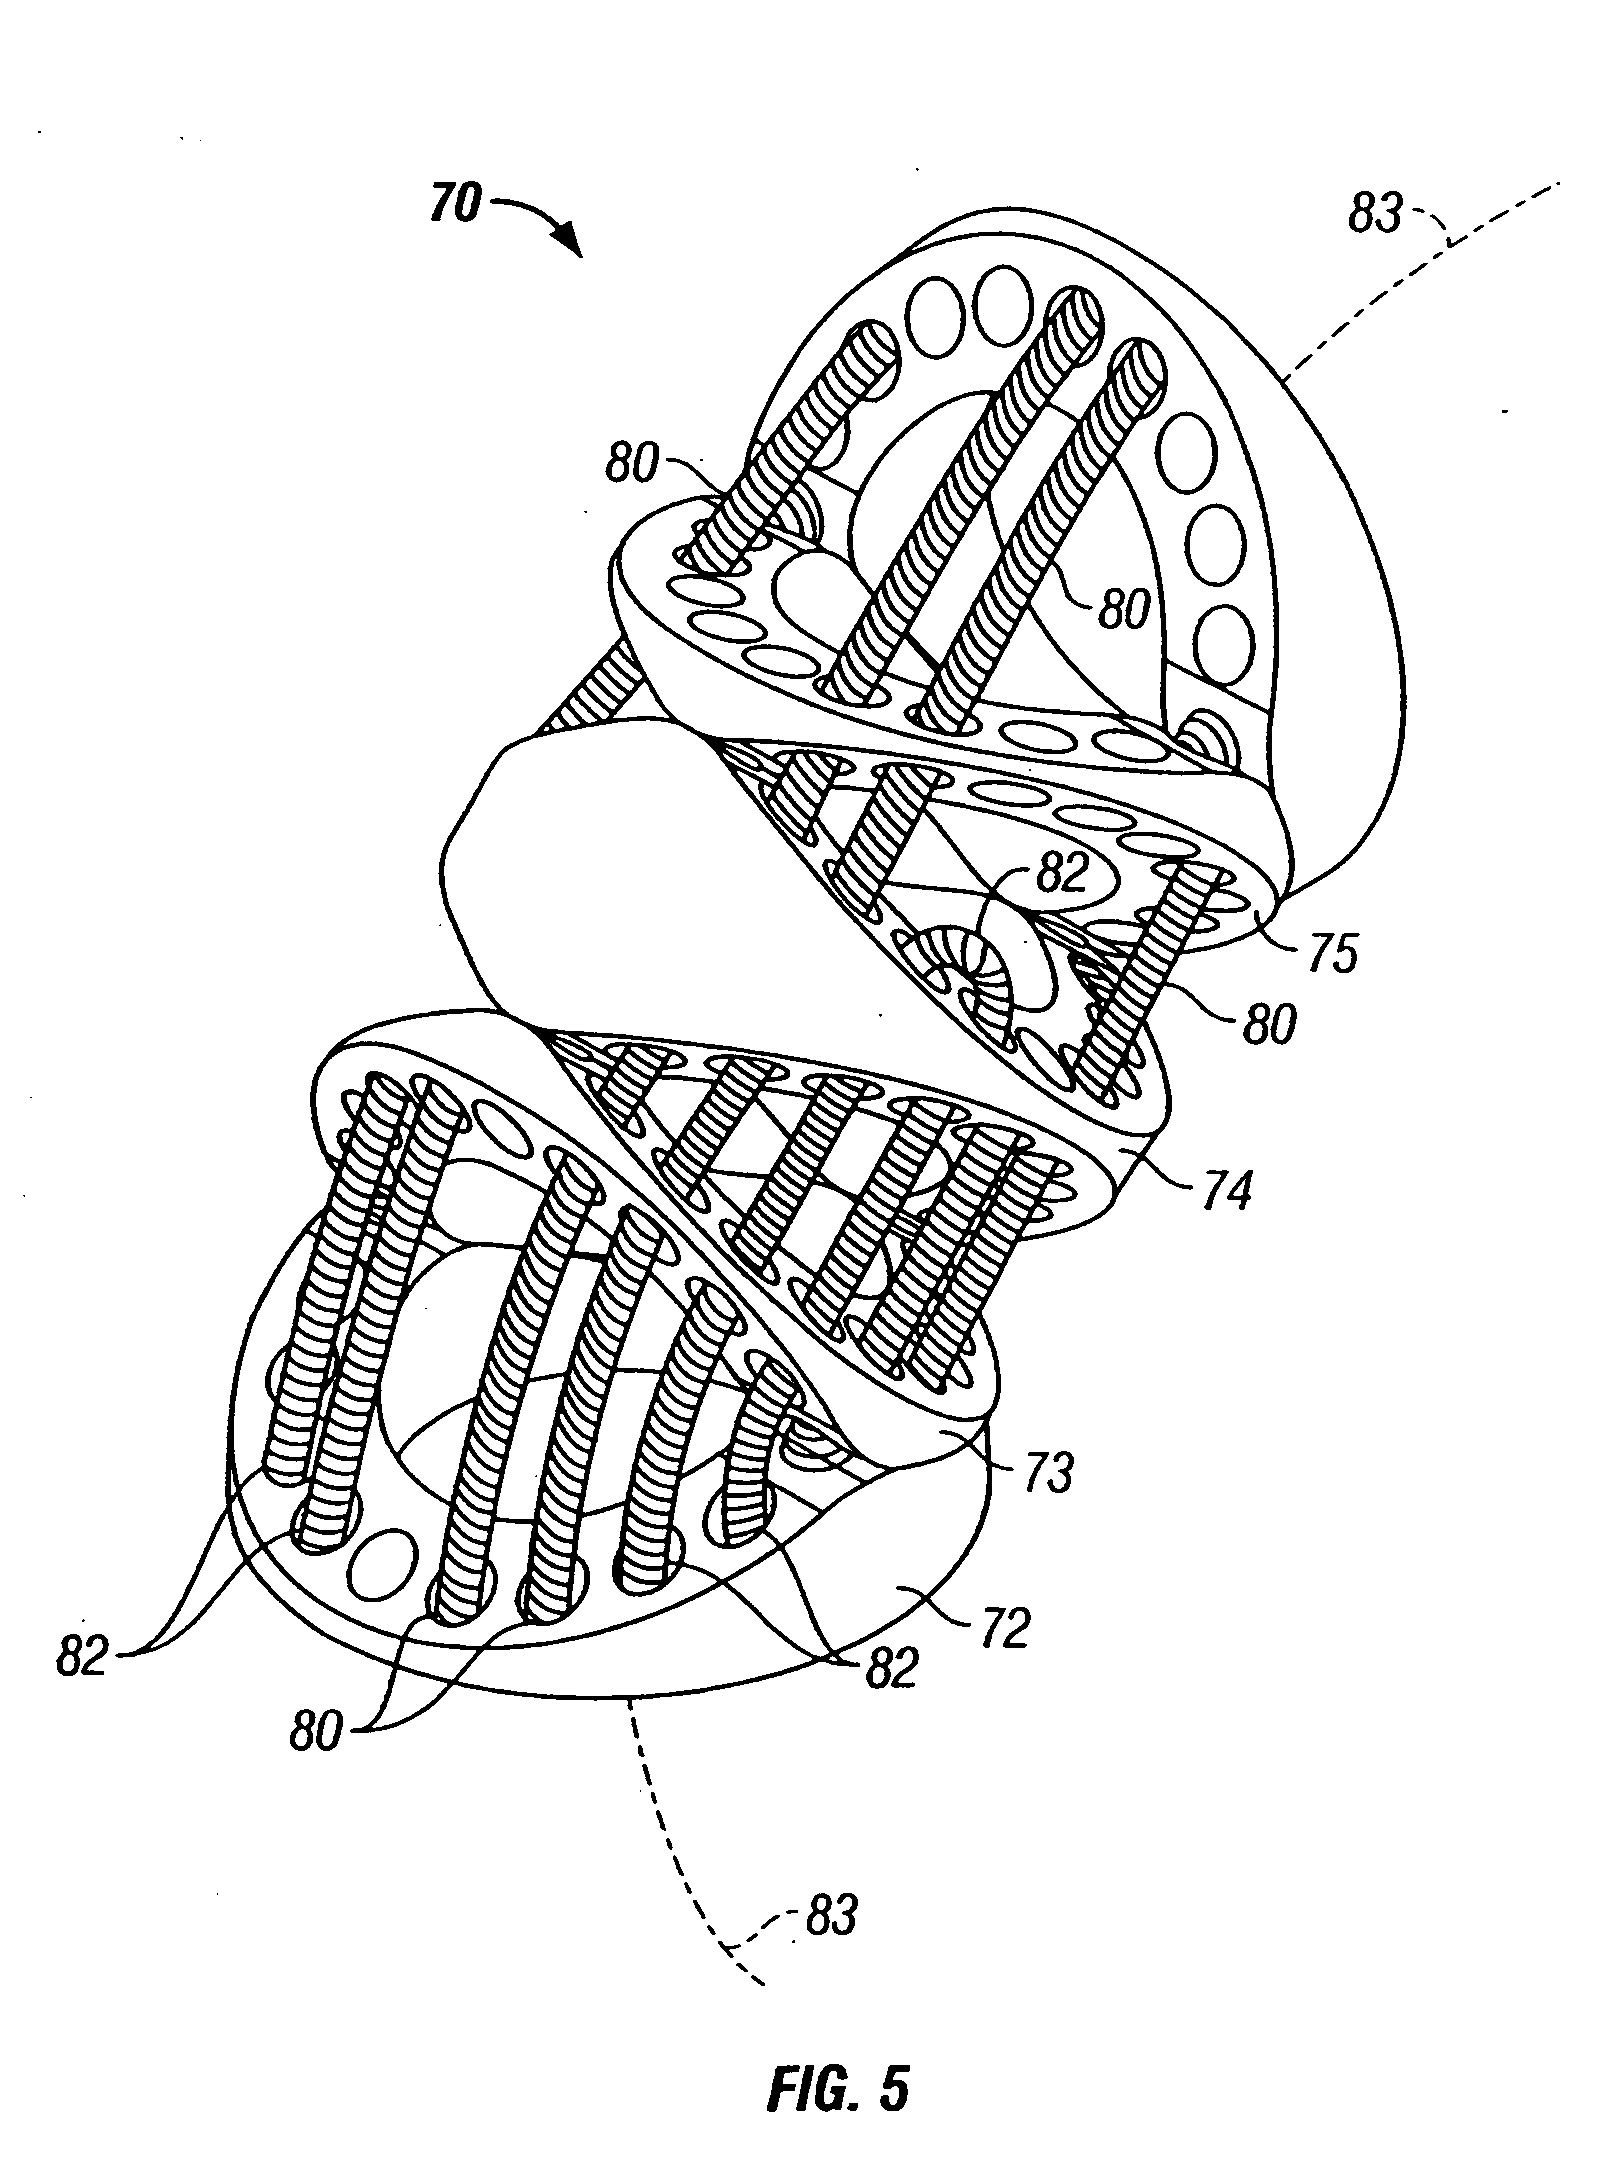 Surgical tool having positively positionable tendon-actuated multi-disk wrist joint